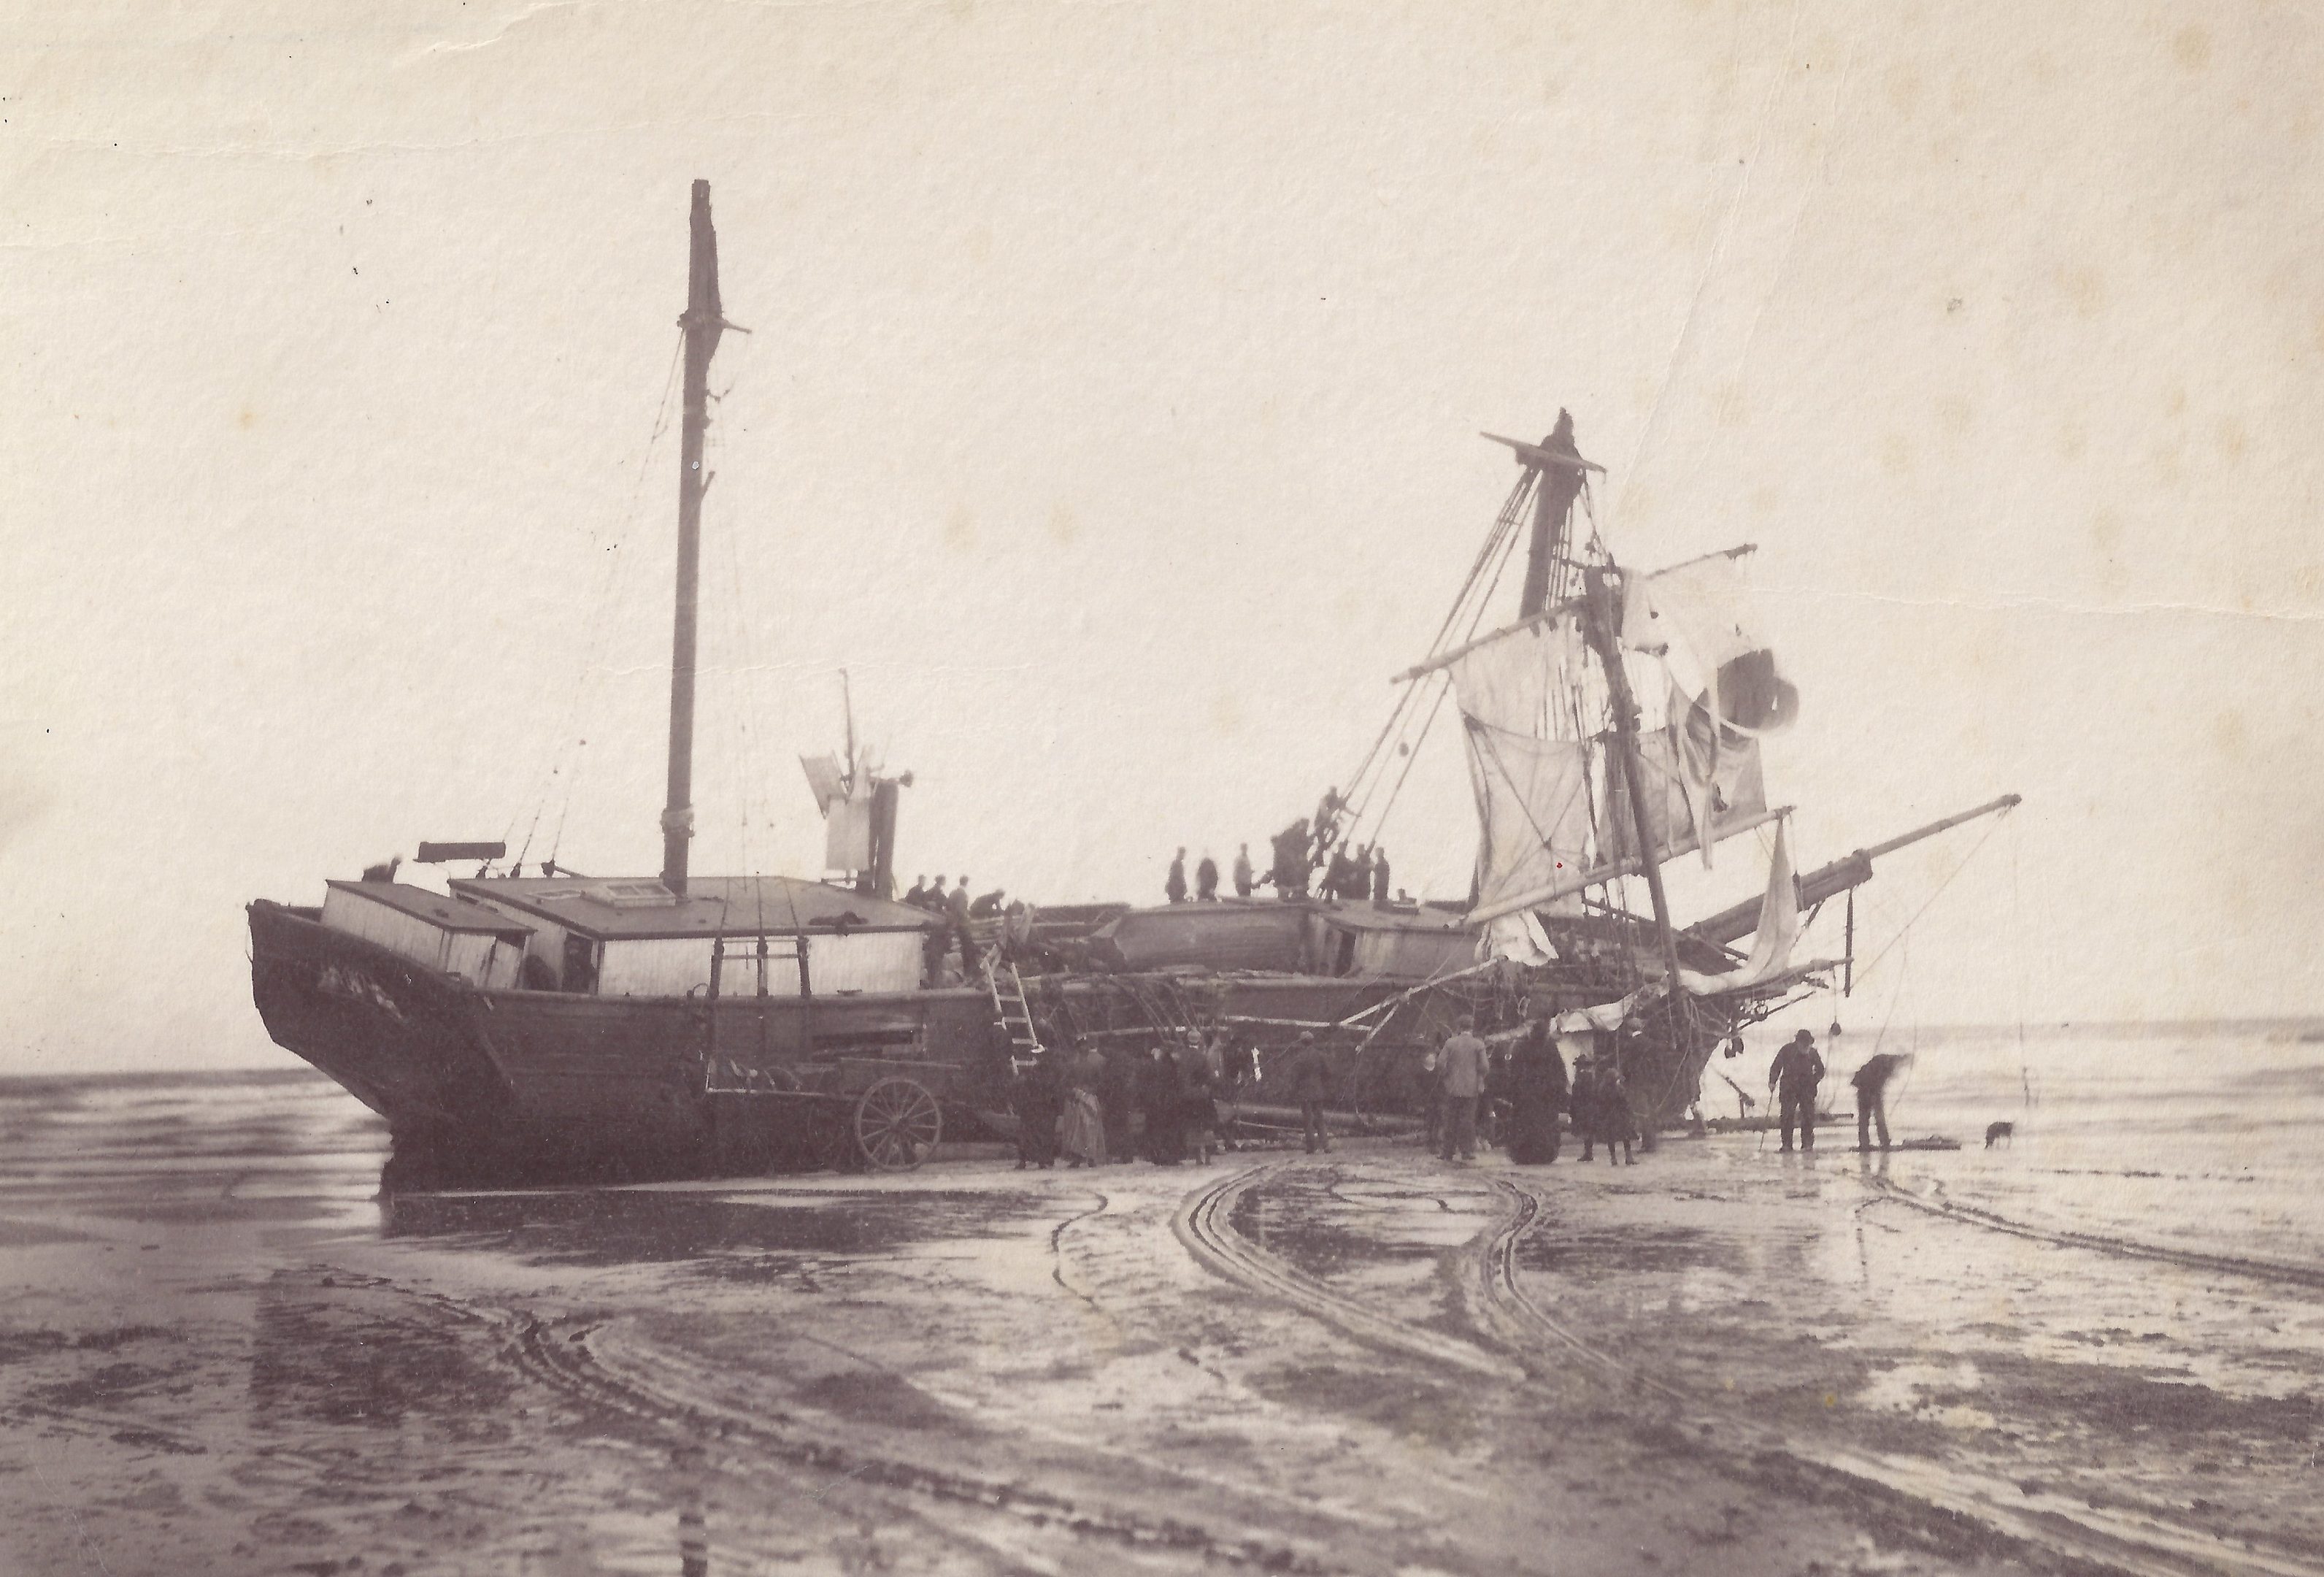 The wreck of the Wilhelm of Riga. Carrying coal from Boston to Memel she was driven ashore on the West Sands, St Andrews, in October 1898.